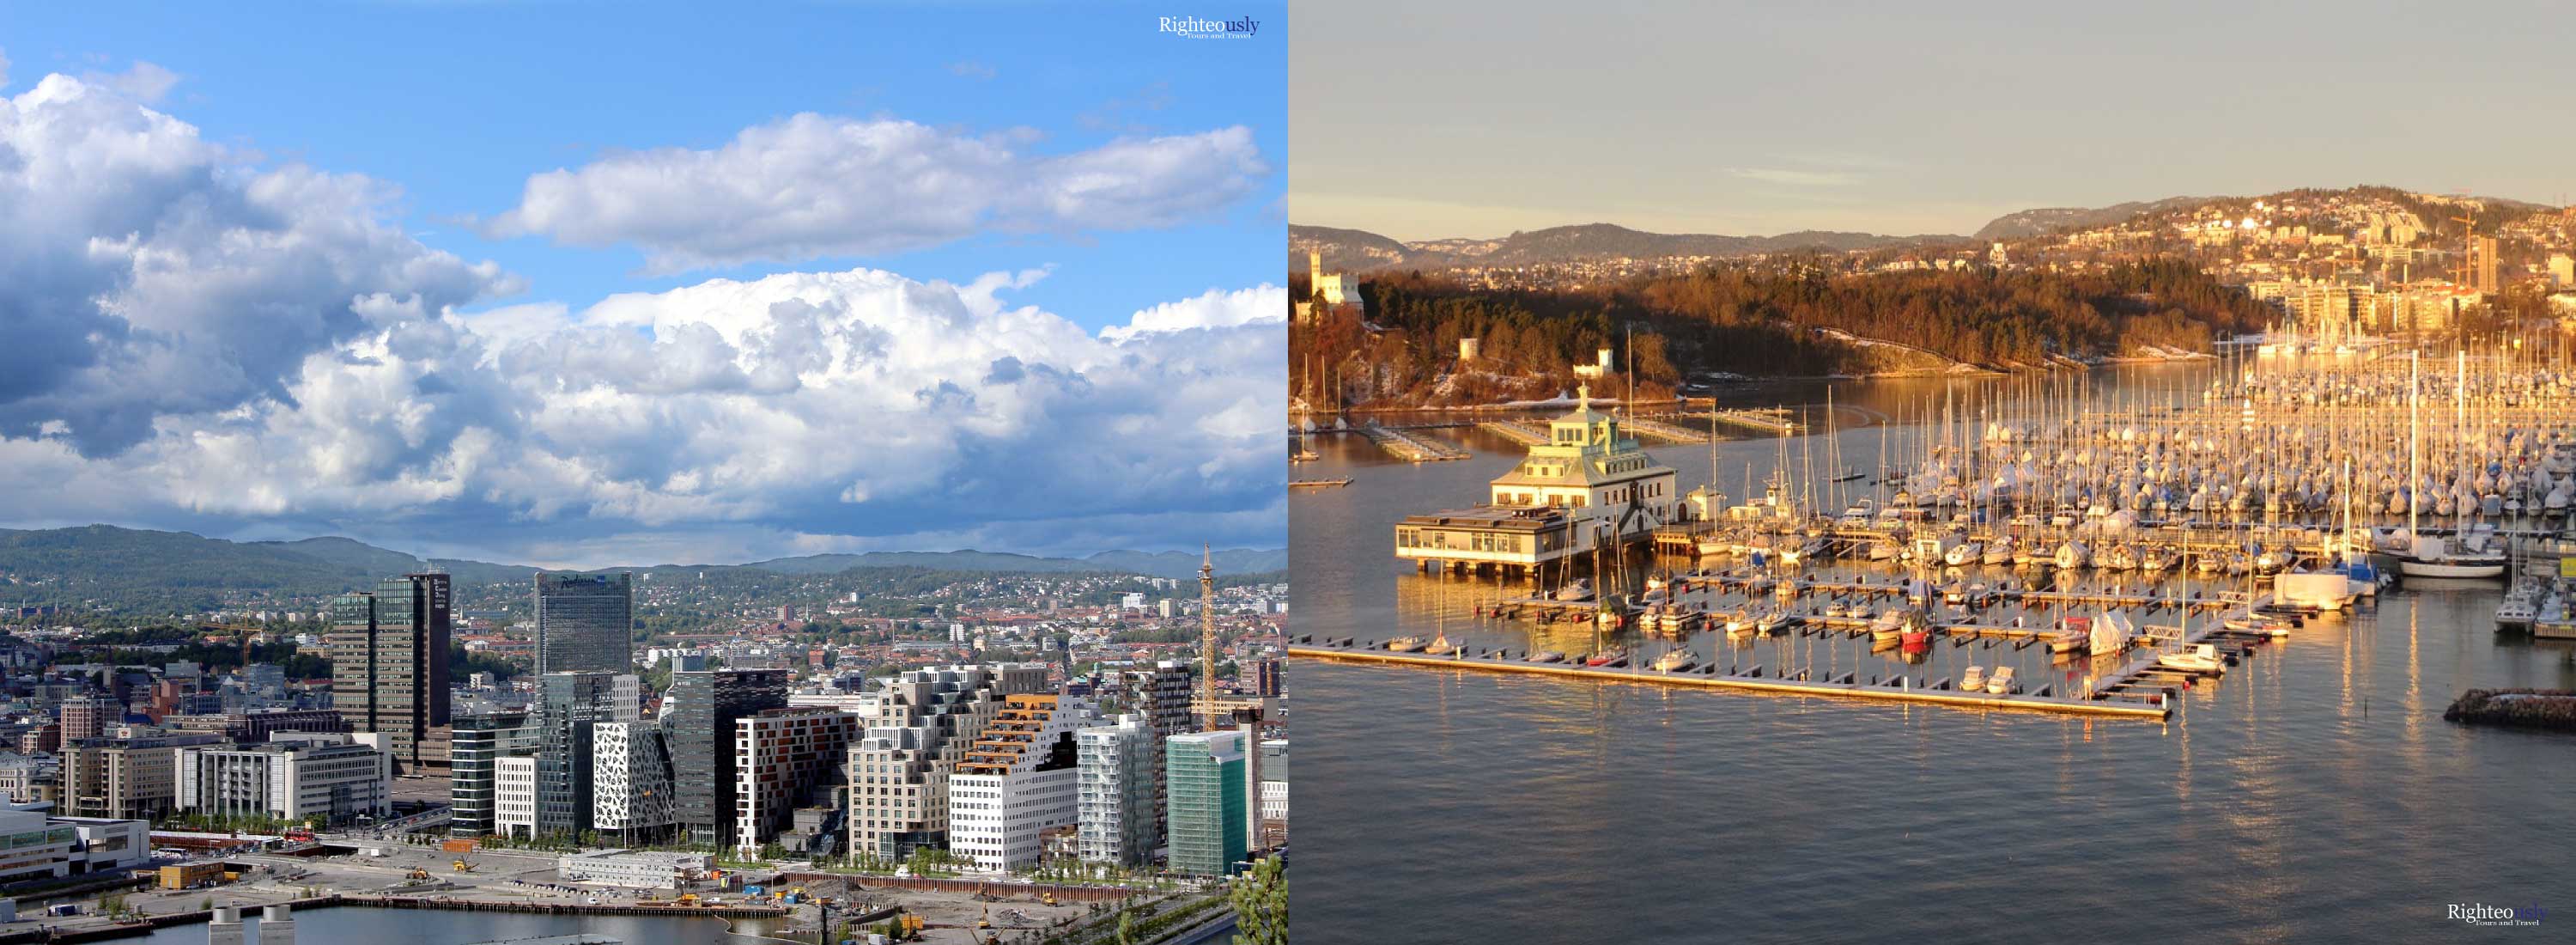 Oslo- The capital of Norway most expensive cities in the world